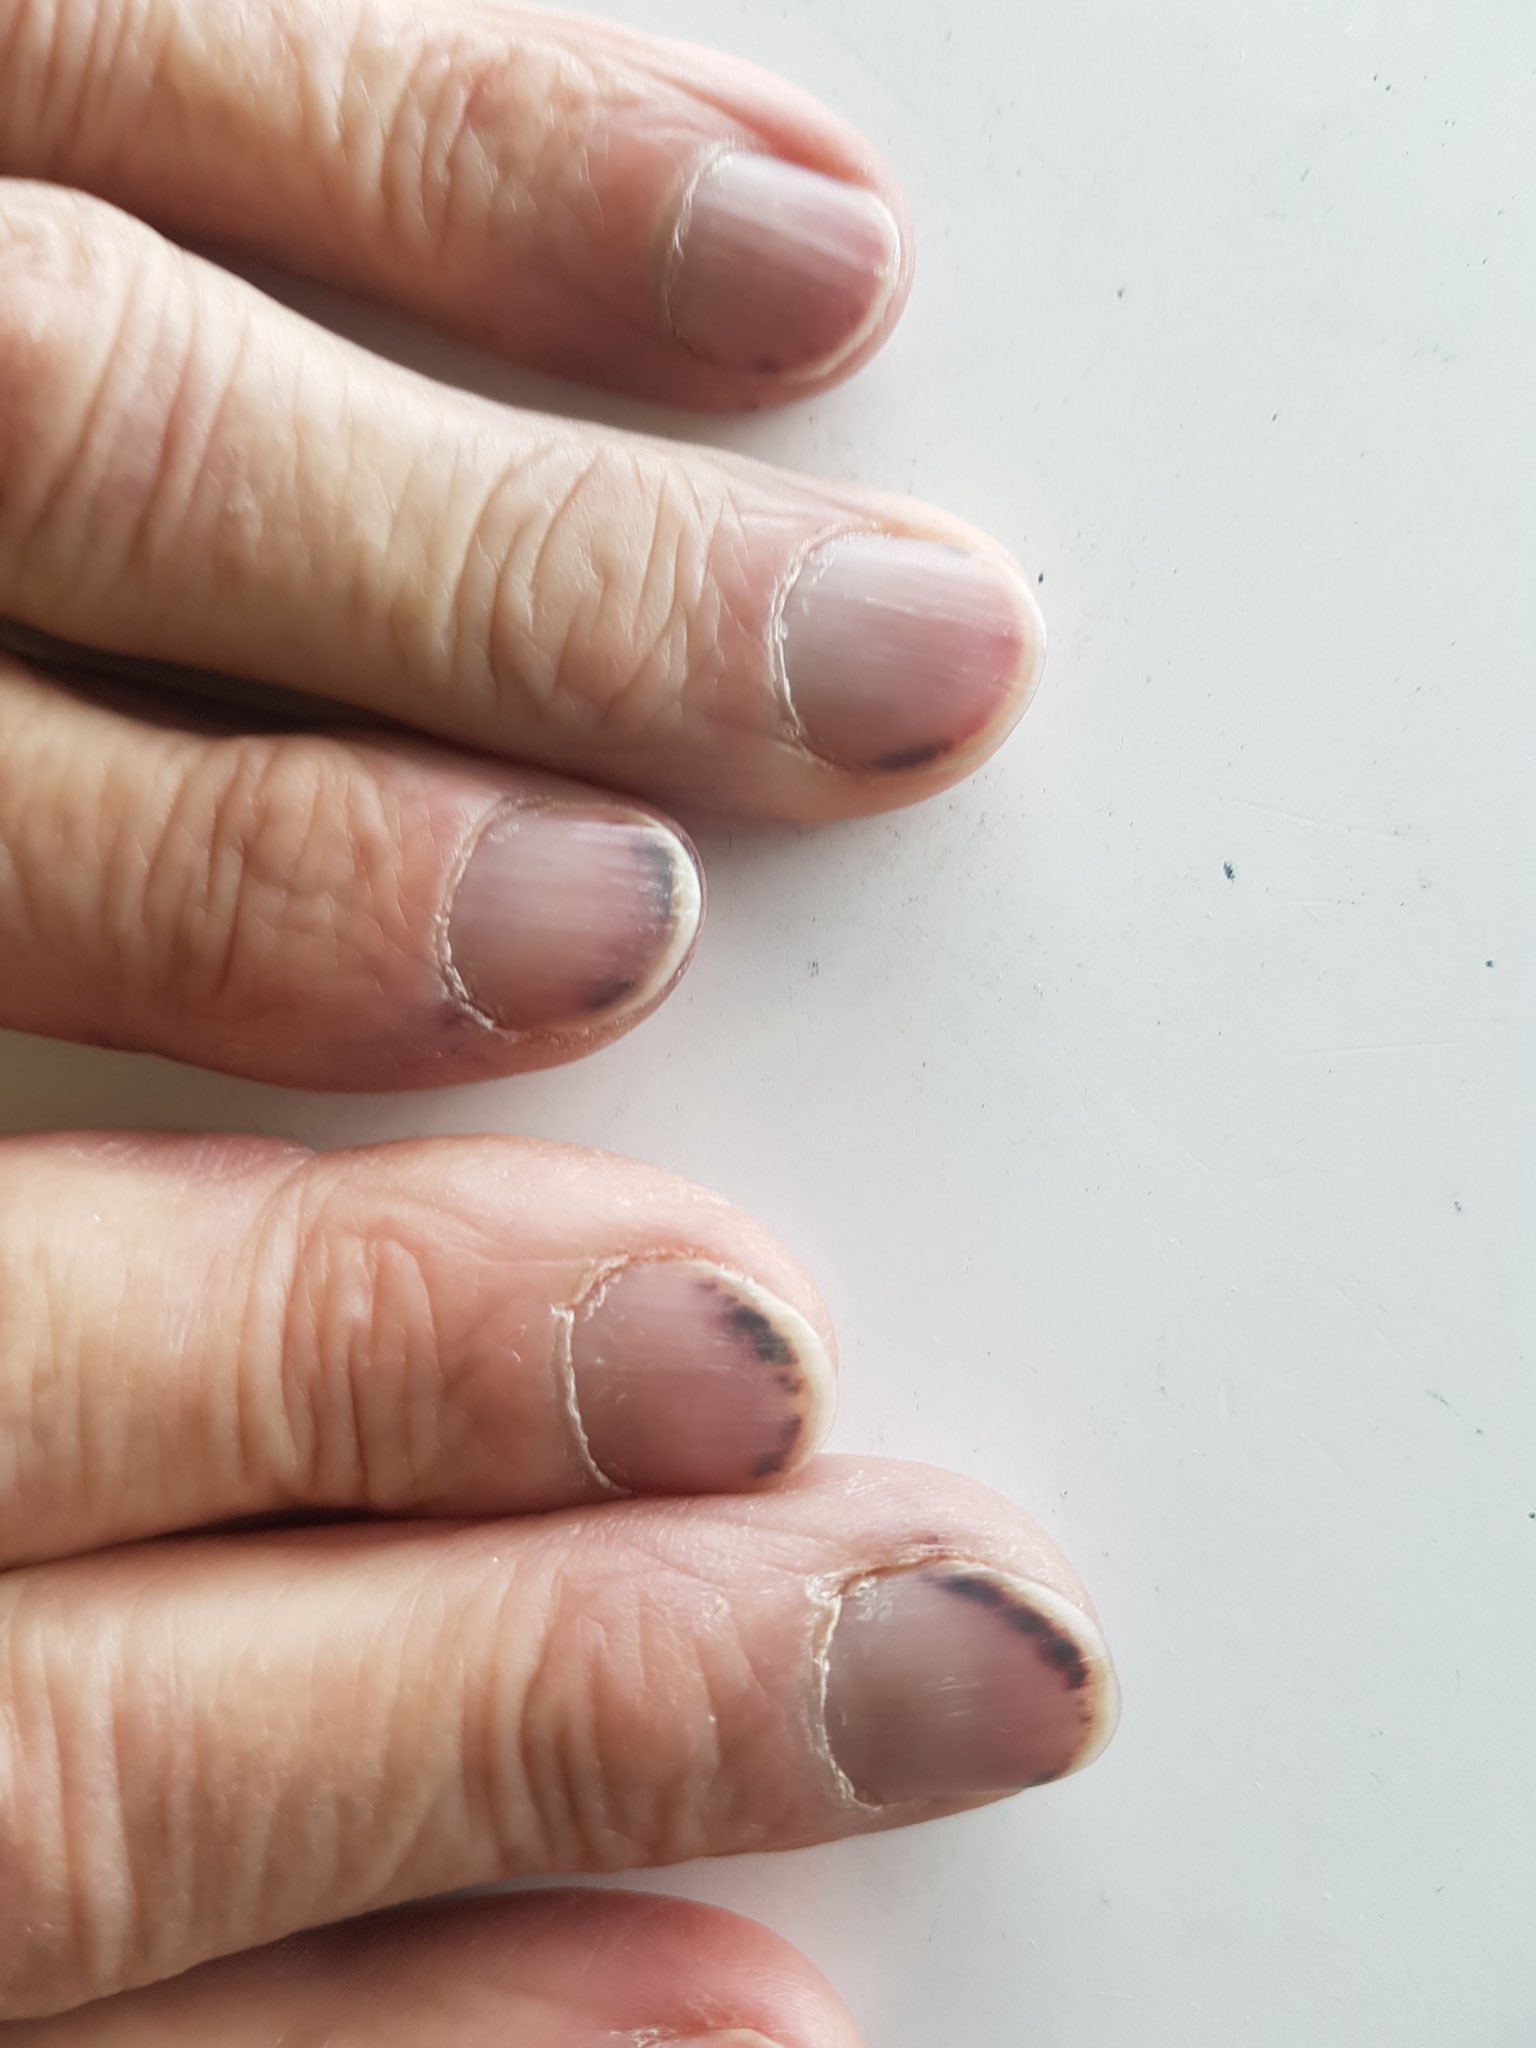 Reason For Black Lines on Nails, According to Manicurist | POPSUGAR Beauty  UK